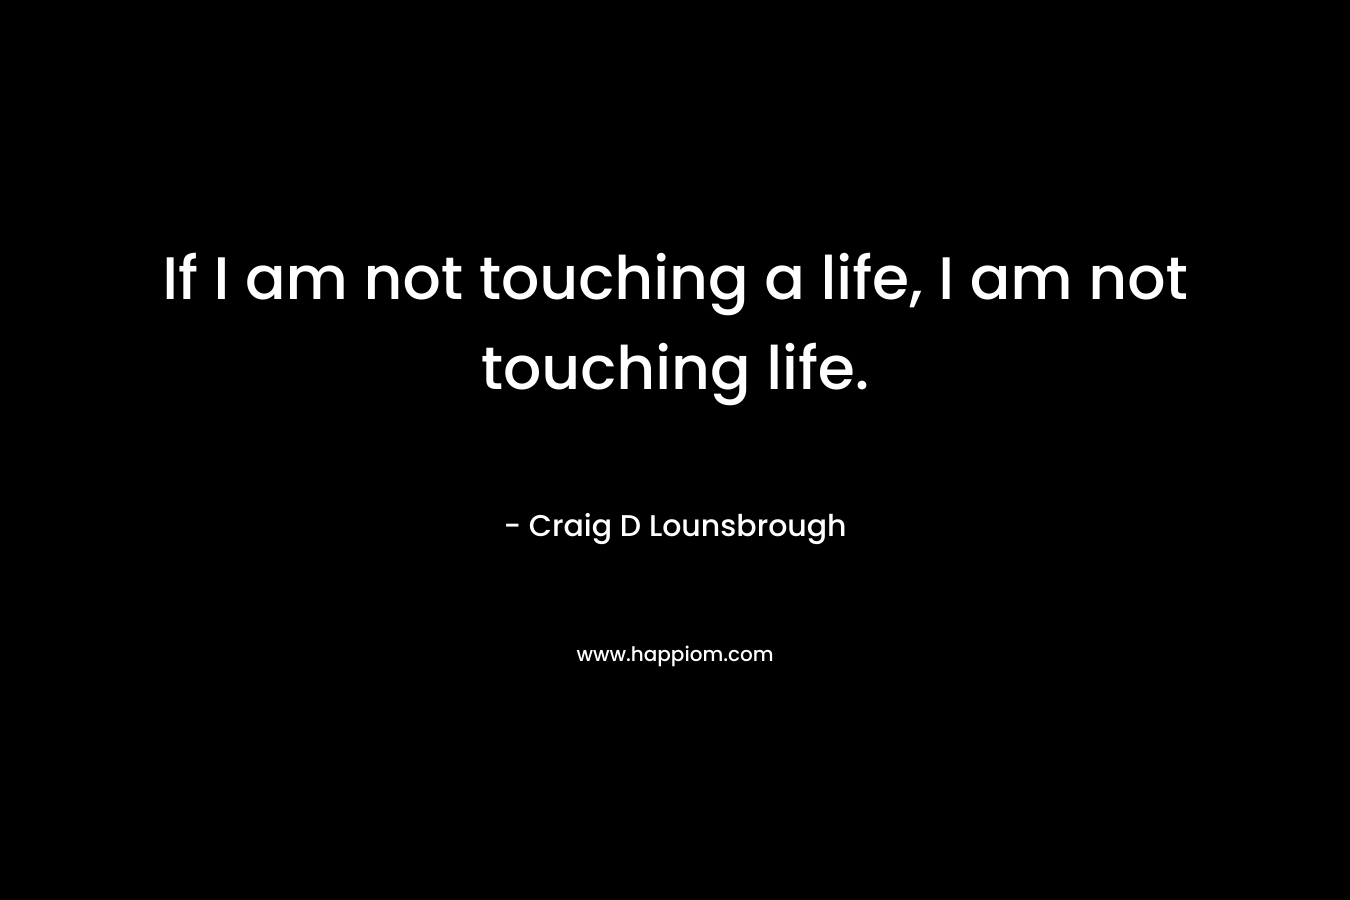 If I am not touching a life, I am not touching life.